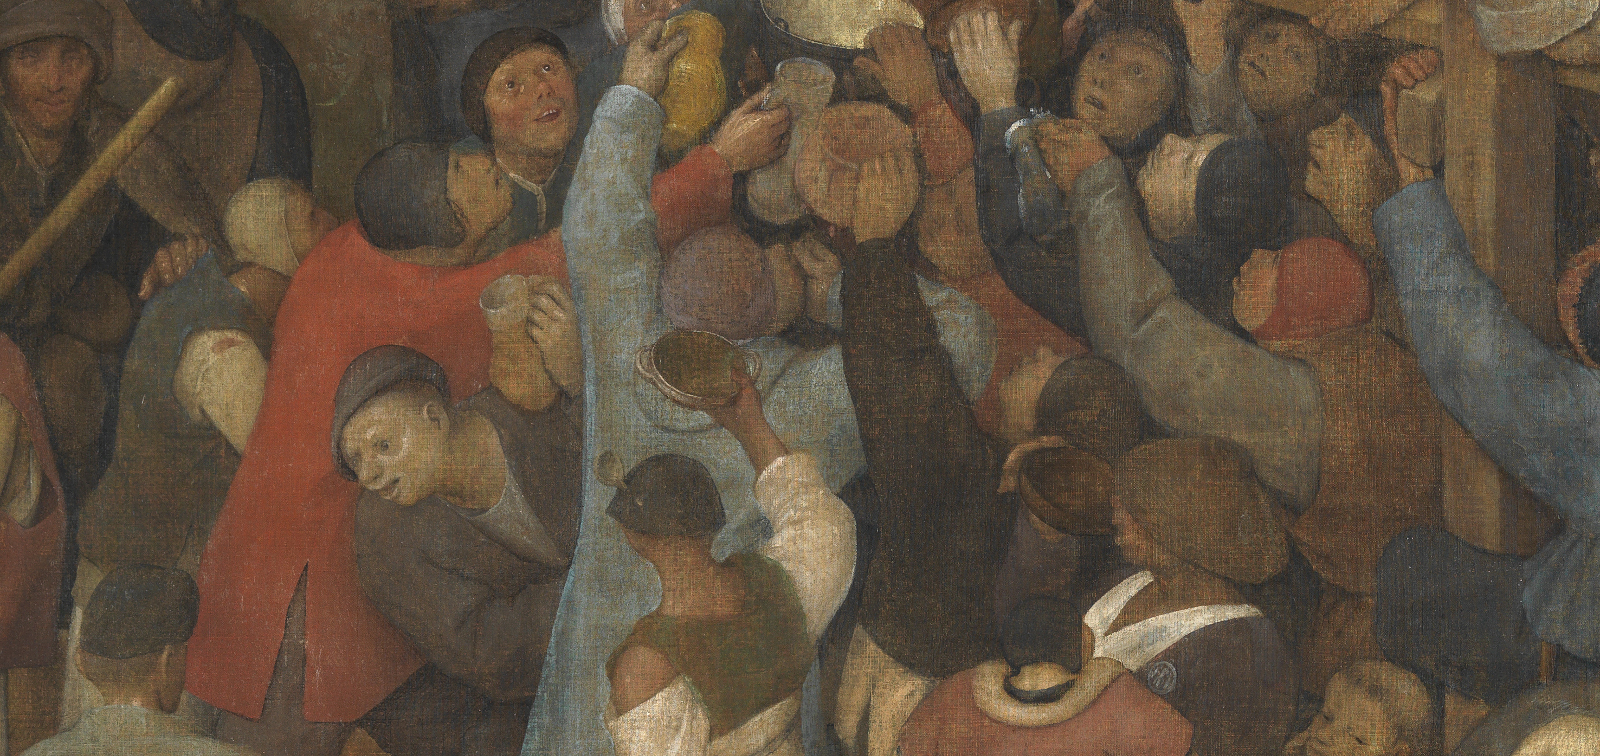 Special display: The Wine of Saint Martin’s Day by Bruegel the Elder